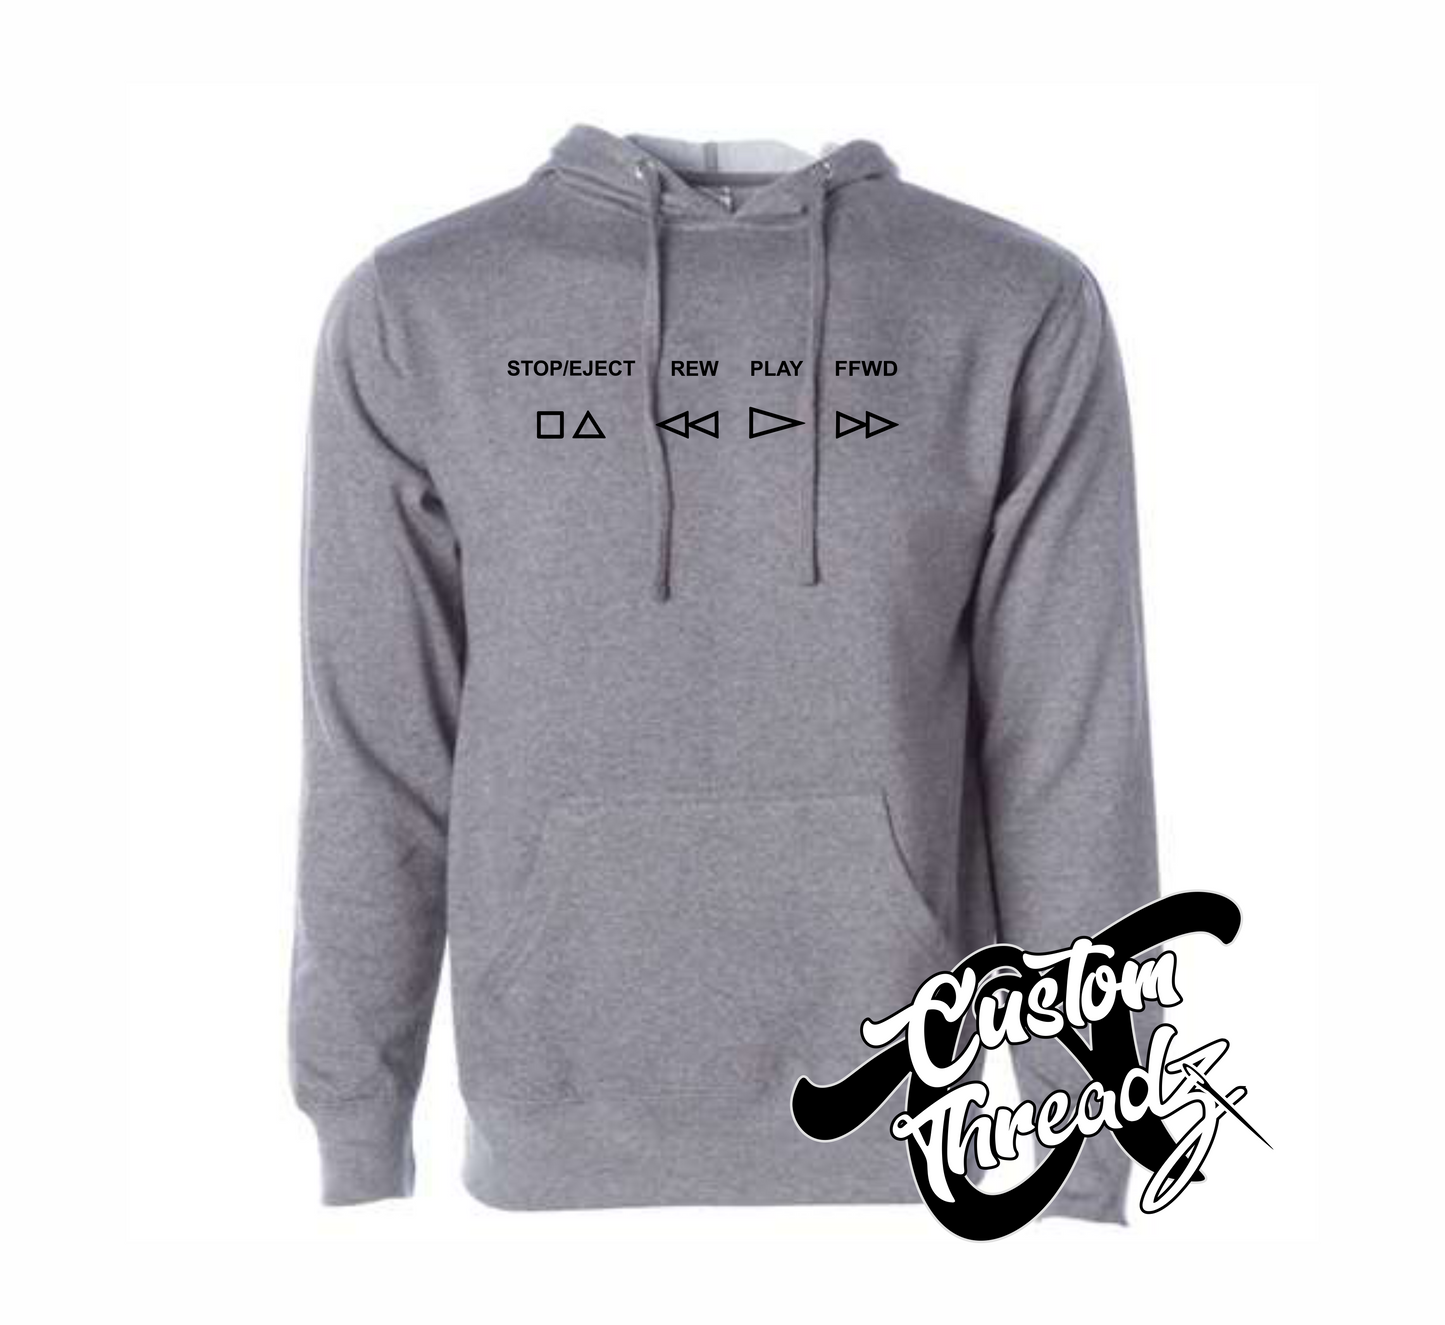 gunmetal grey hoodie with VCR buttons stop eject rew play ffwd DTG printed design